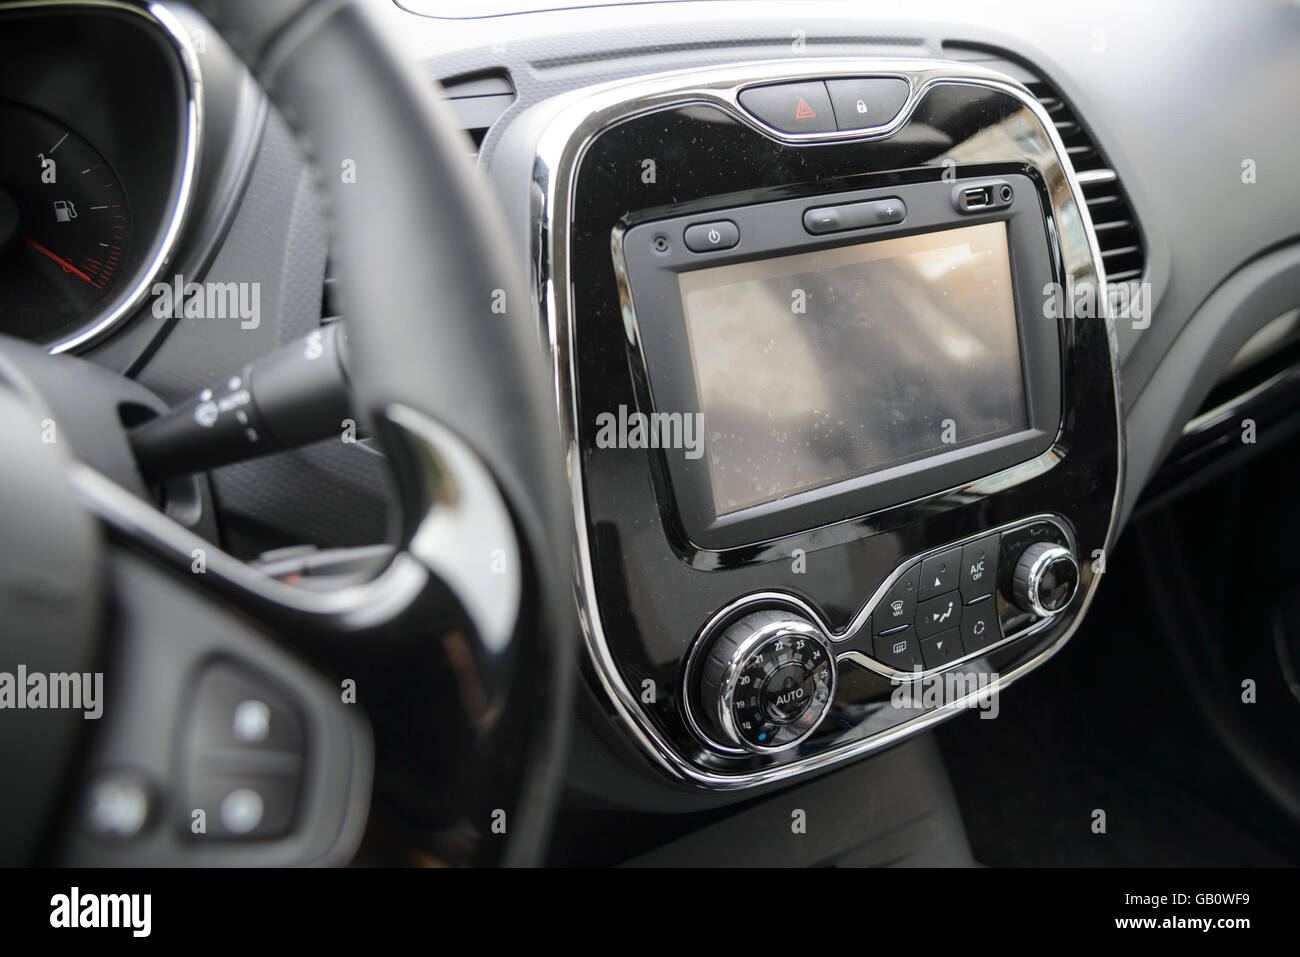 Car dashboard stereo and navigation system with big LCD screen Stock Photo